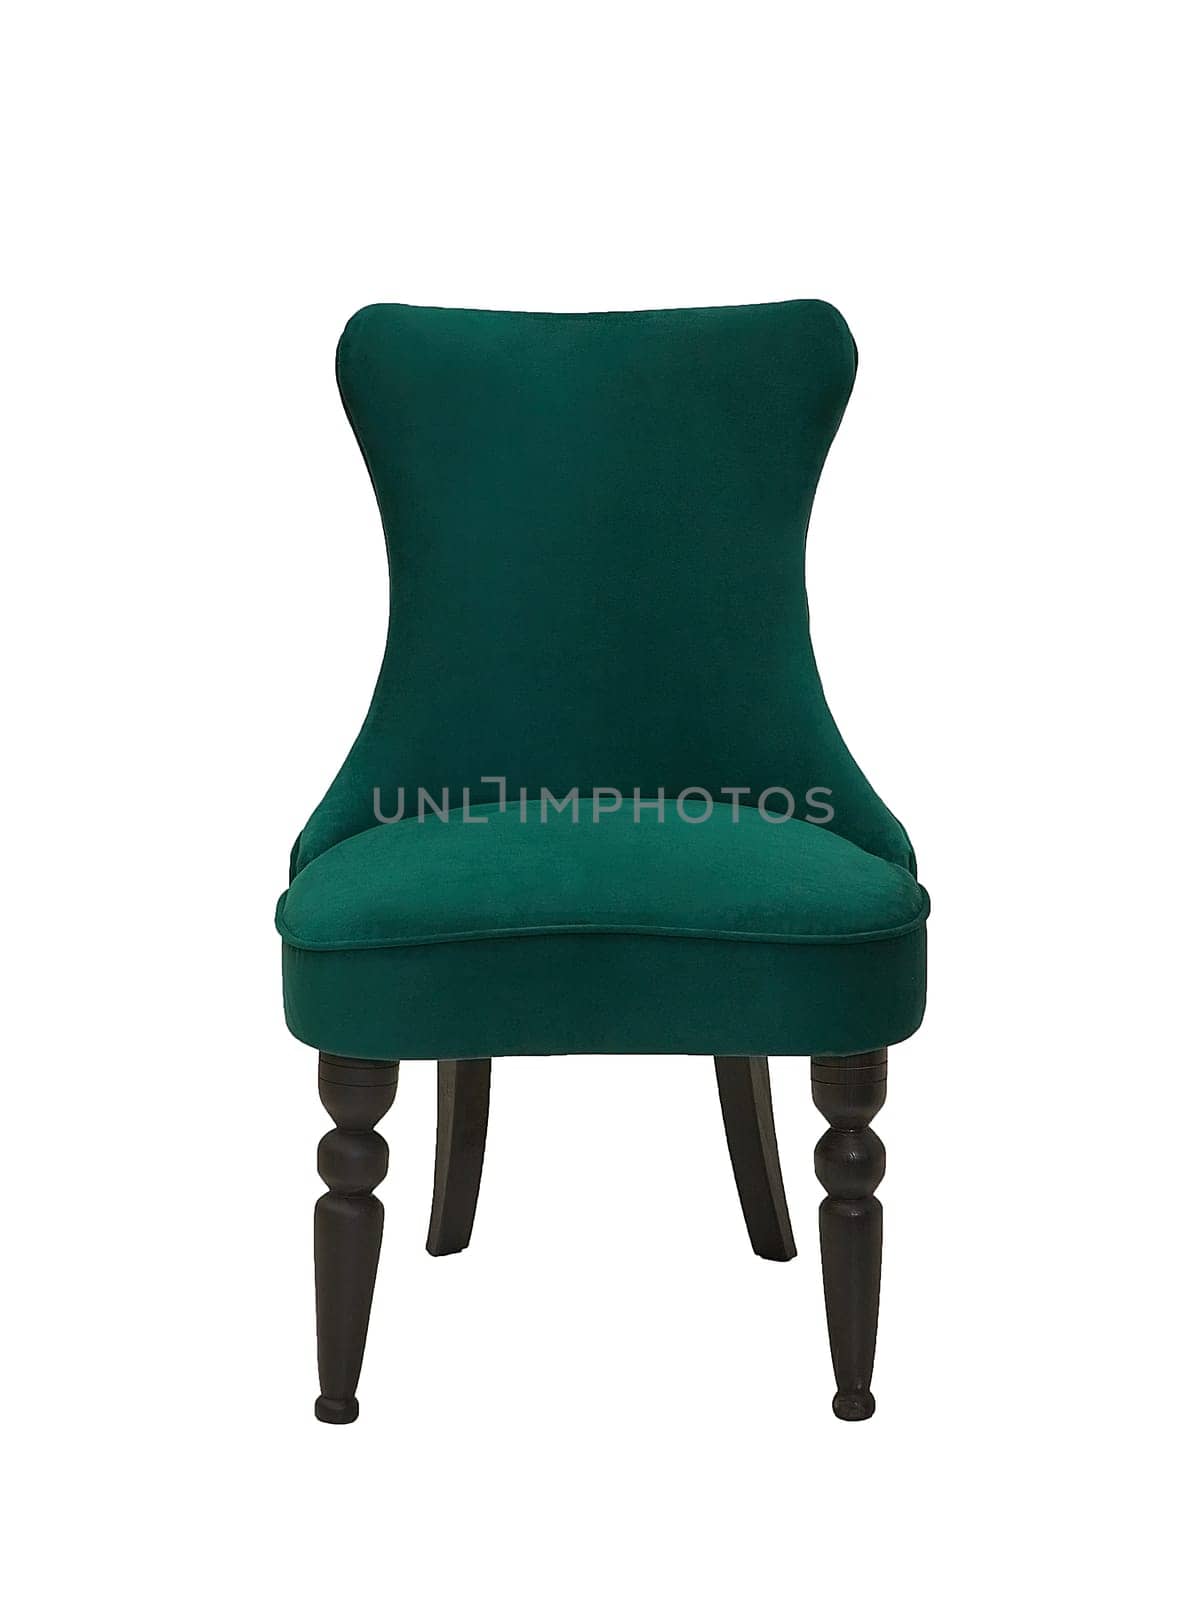 green fabric chair in vintage style with wooden legs isolated on white background, front view. retro furniture in classical style, interior, home design